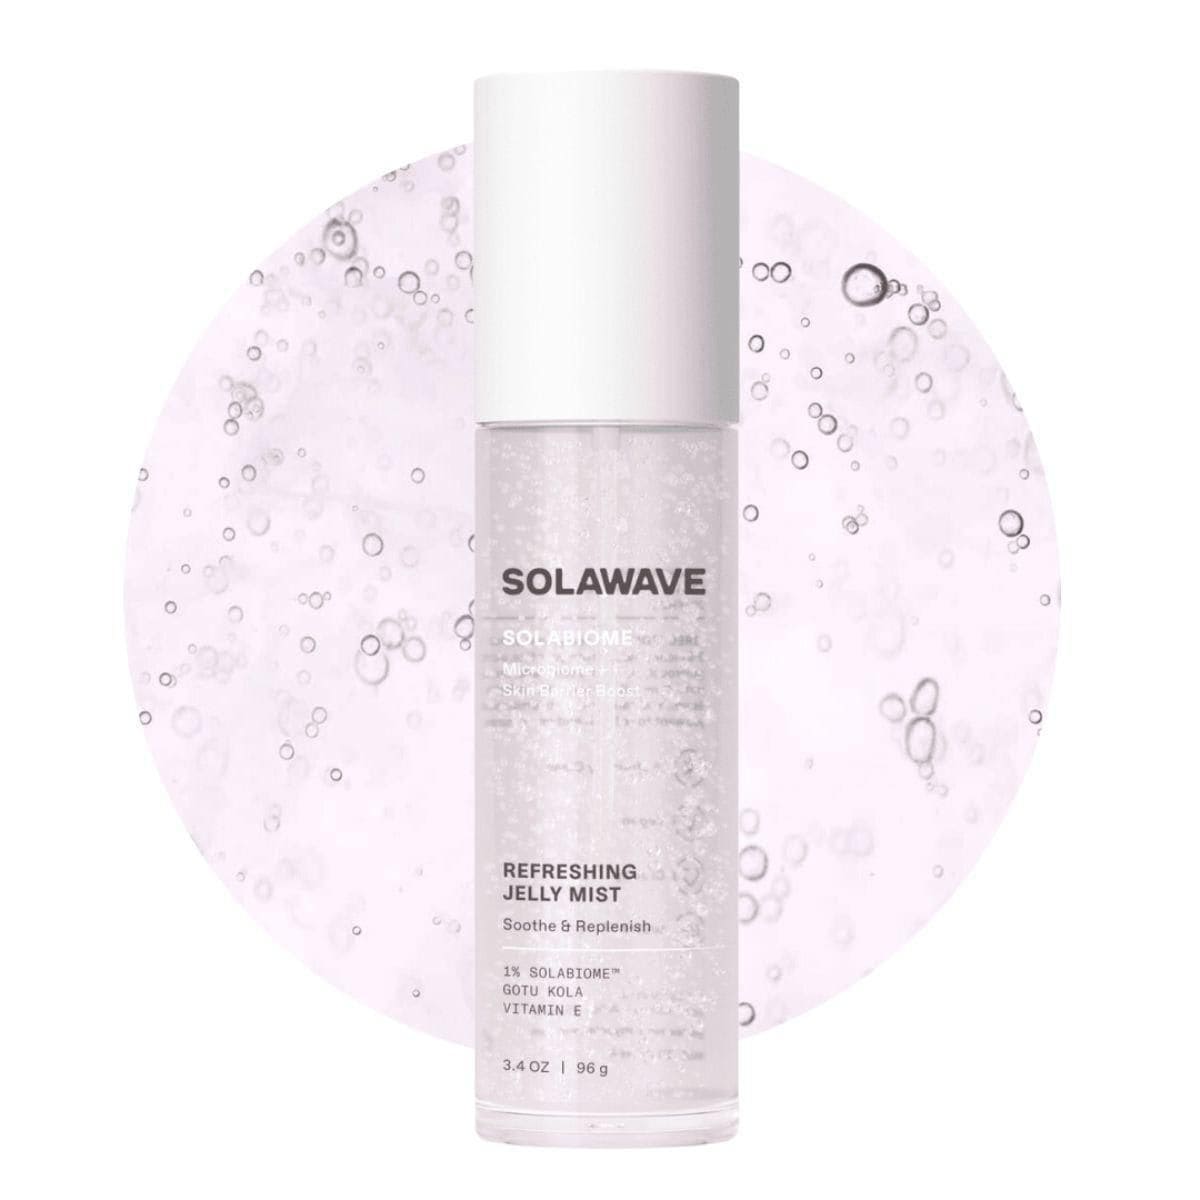 Solawave's Solabiome Jelly Mist